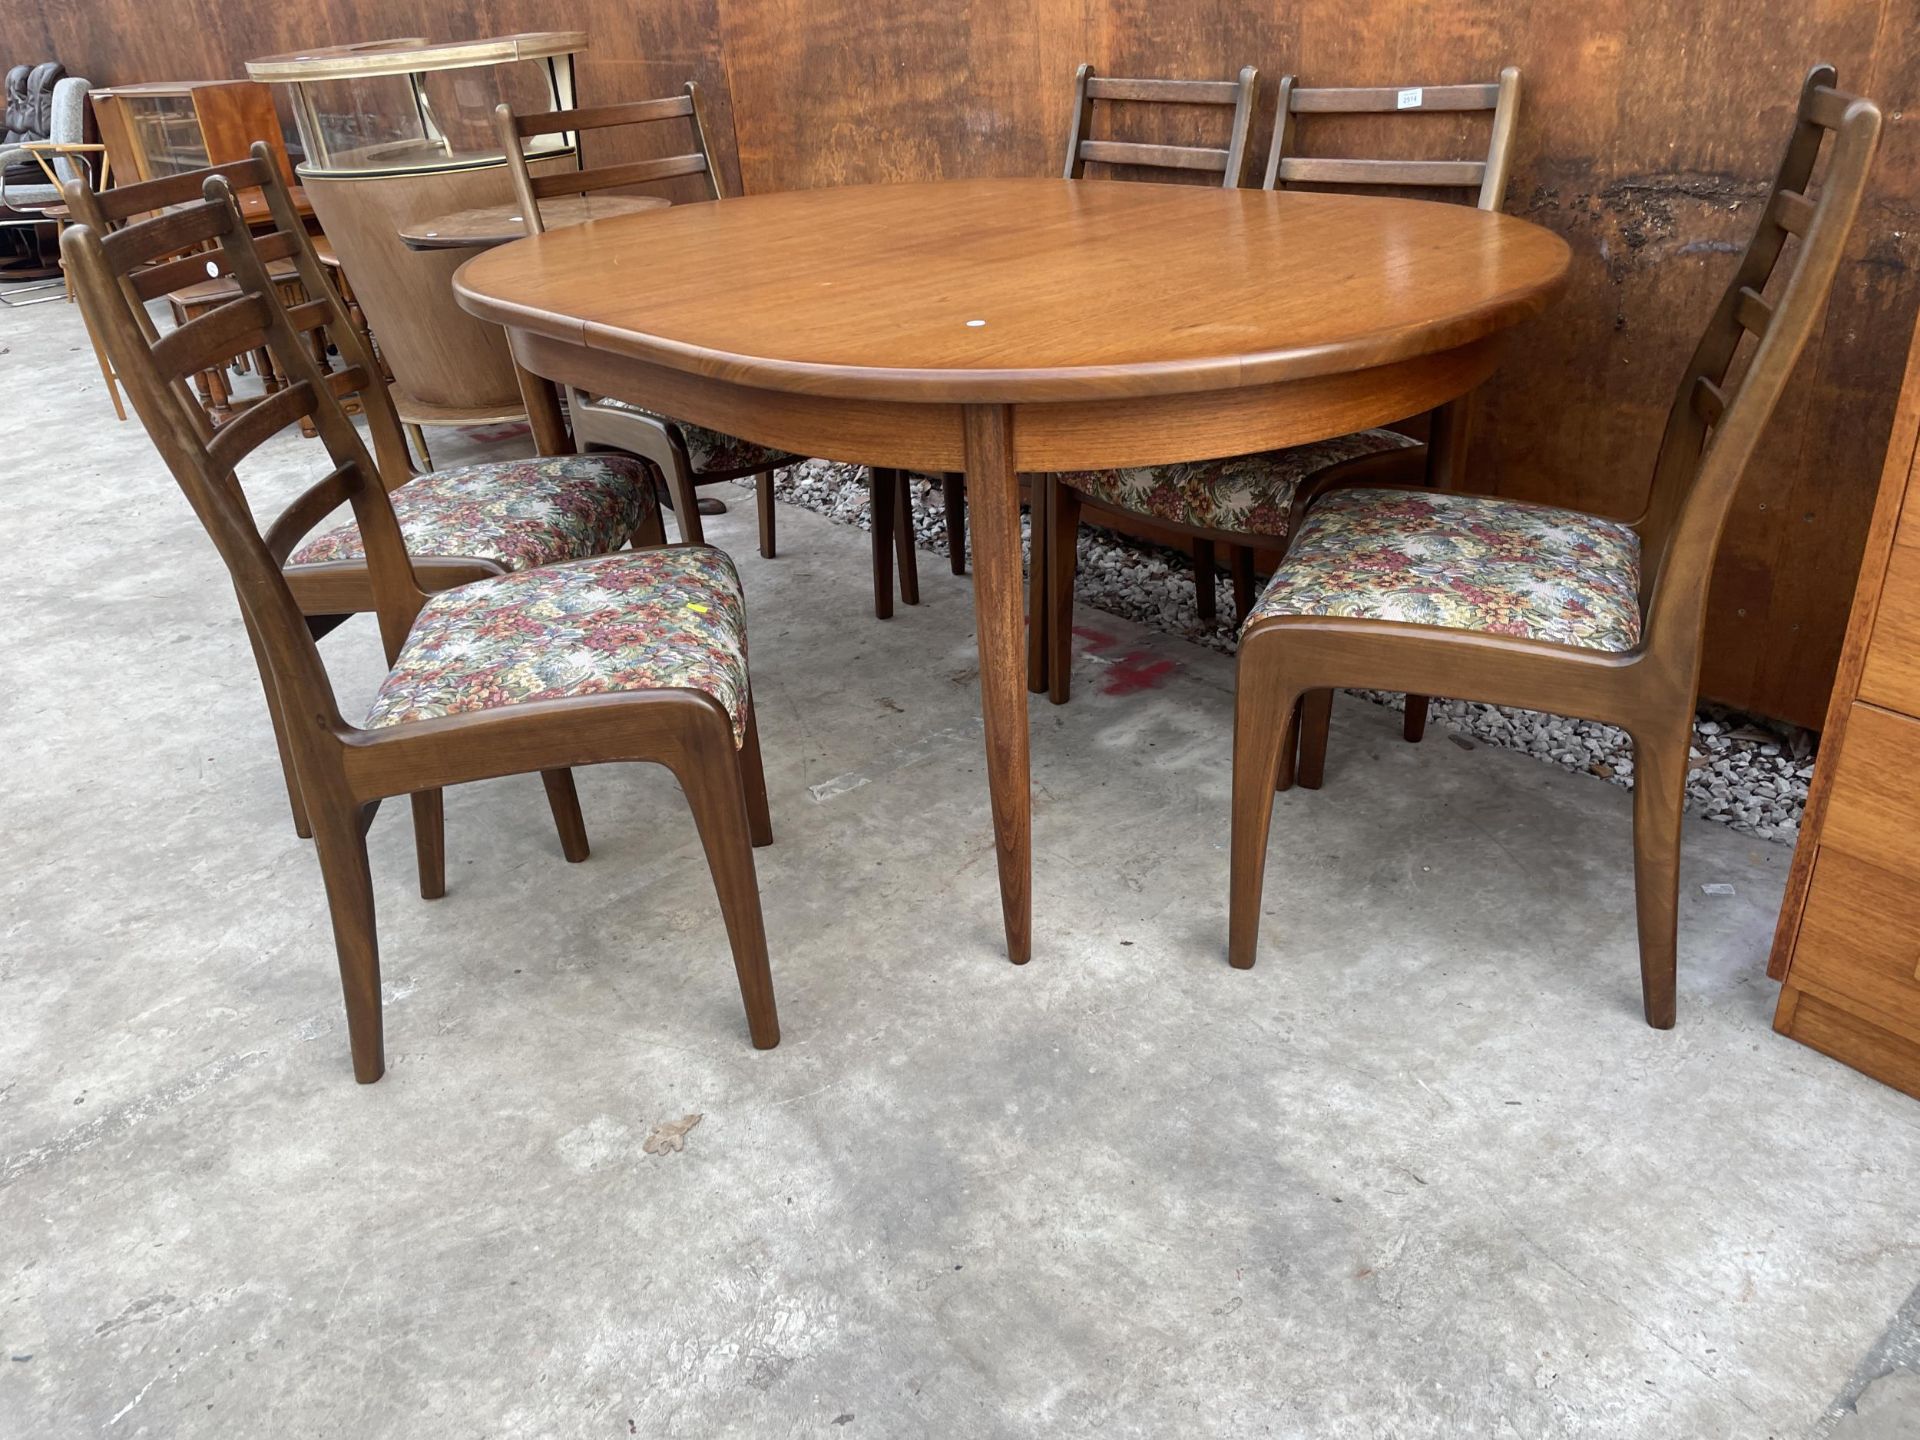 A G-PLAN RETRO TEAK EXTENDING DINING TABLE, 64 X 44" (LEAF 18") AND SIX LADDERBACK DINING CHAIRS - Image 3 of 7